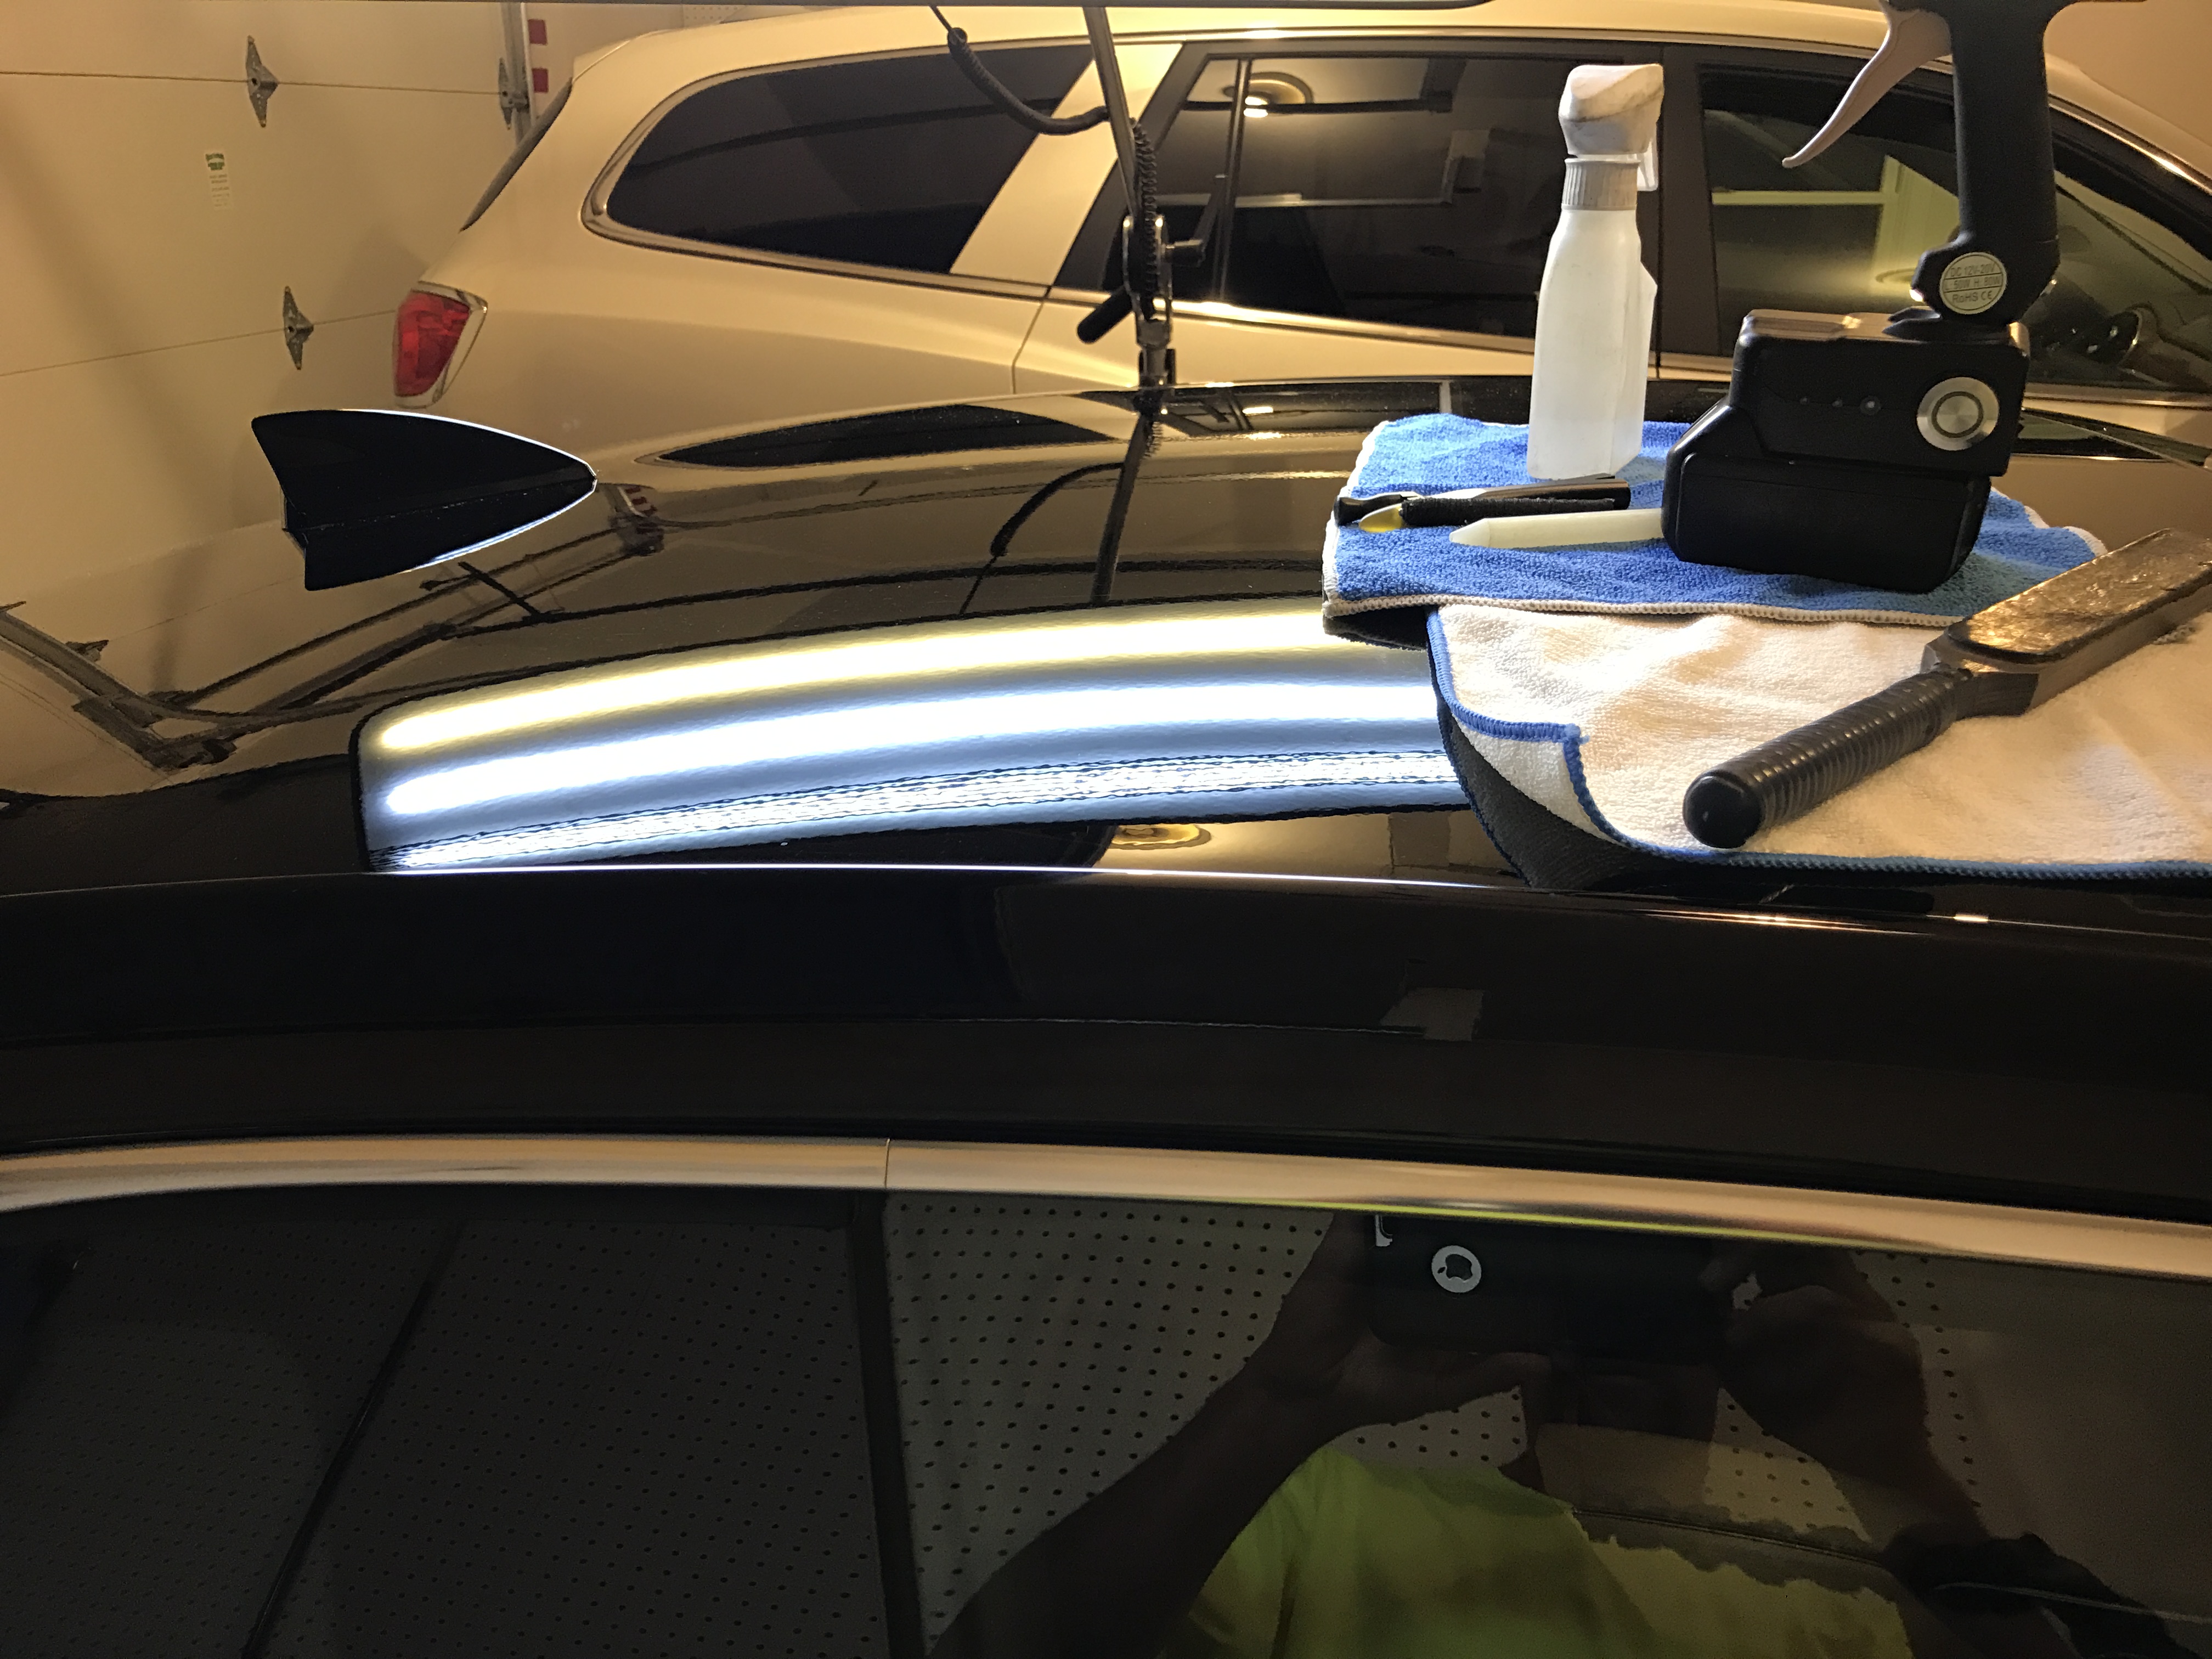 Acorn Damage on roof of this 2016 Cadillac ATS under the inspection lights of the Paintless dent removal process. Michael Bocek out of Springfield, IL was able to remove this dent with ease. http://217Dent.com After Image